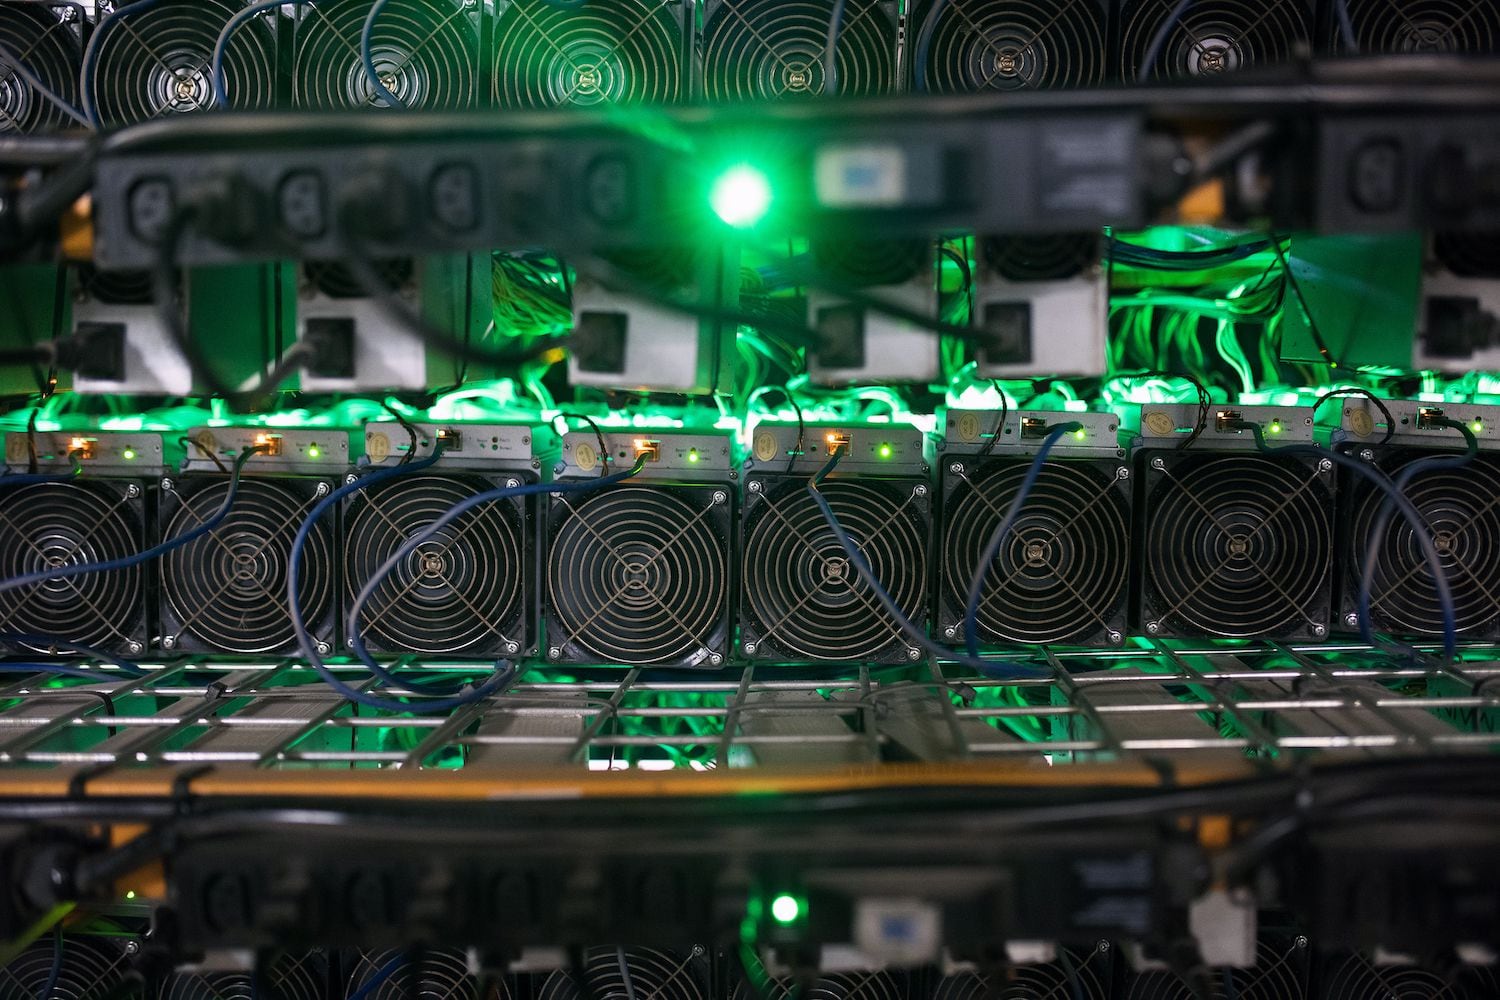 Gryphon Digital Mining to Buy 7.2K S19J Pro Antminers From Bitmain for $48Mon July 8, 2021 at 6:35 pm